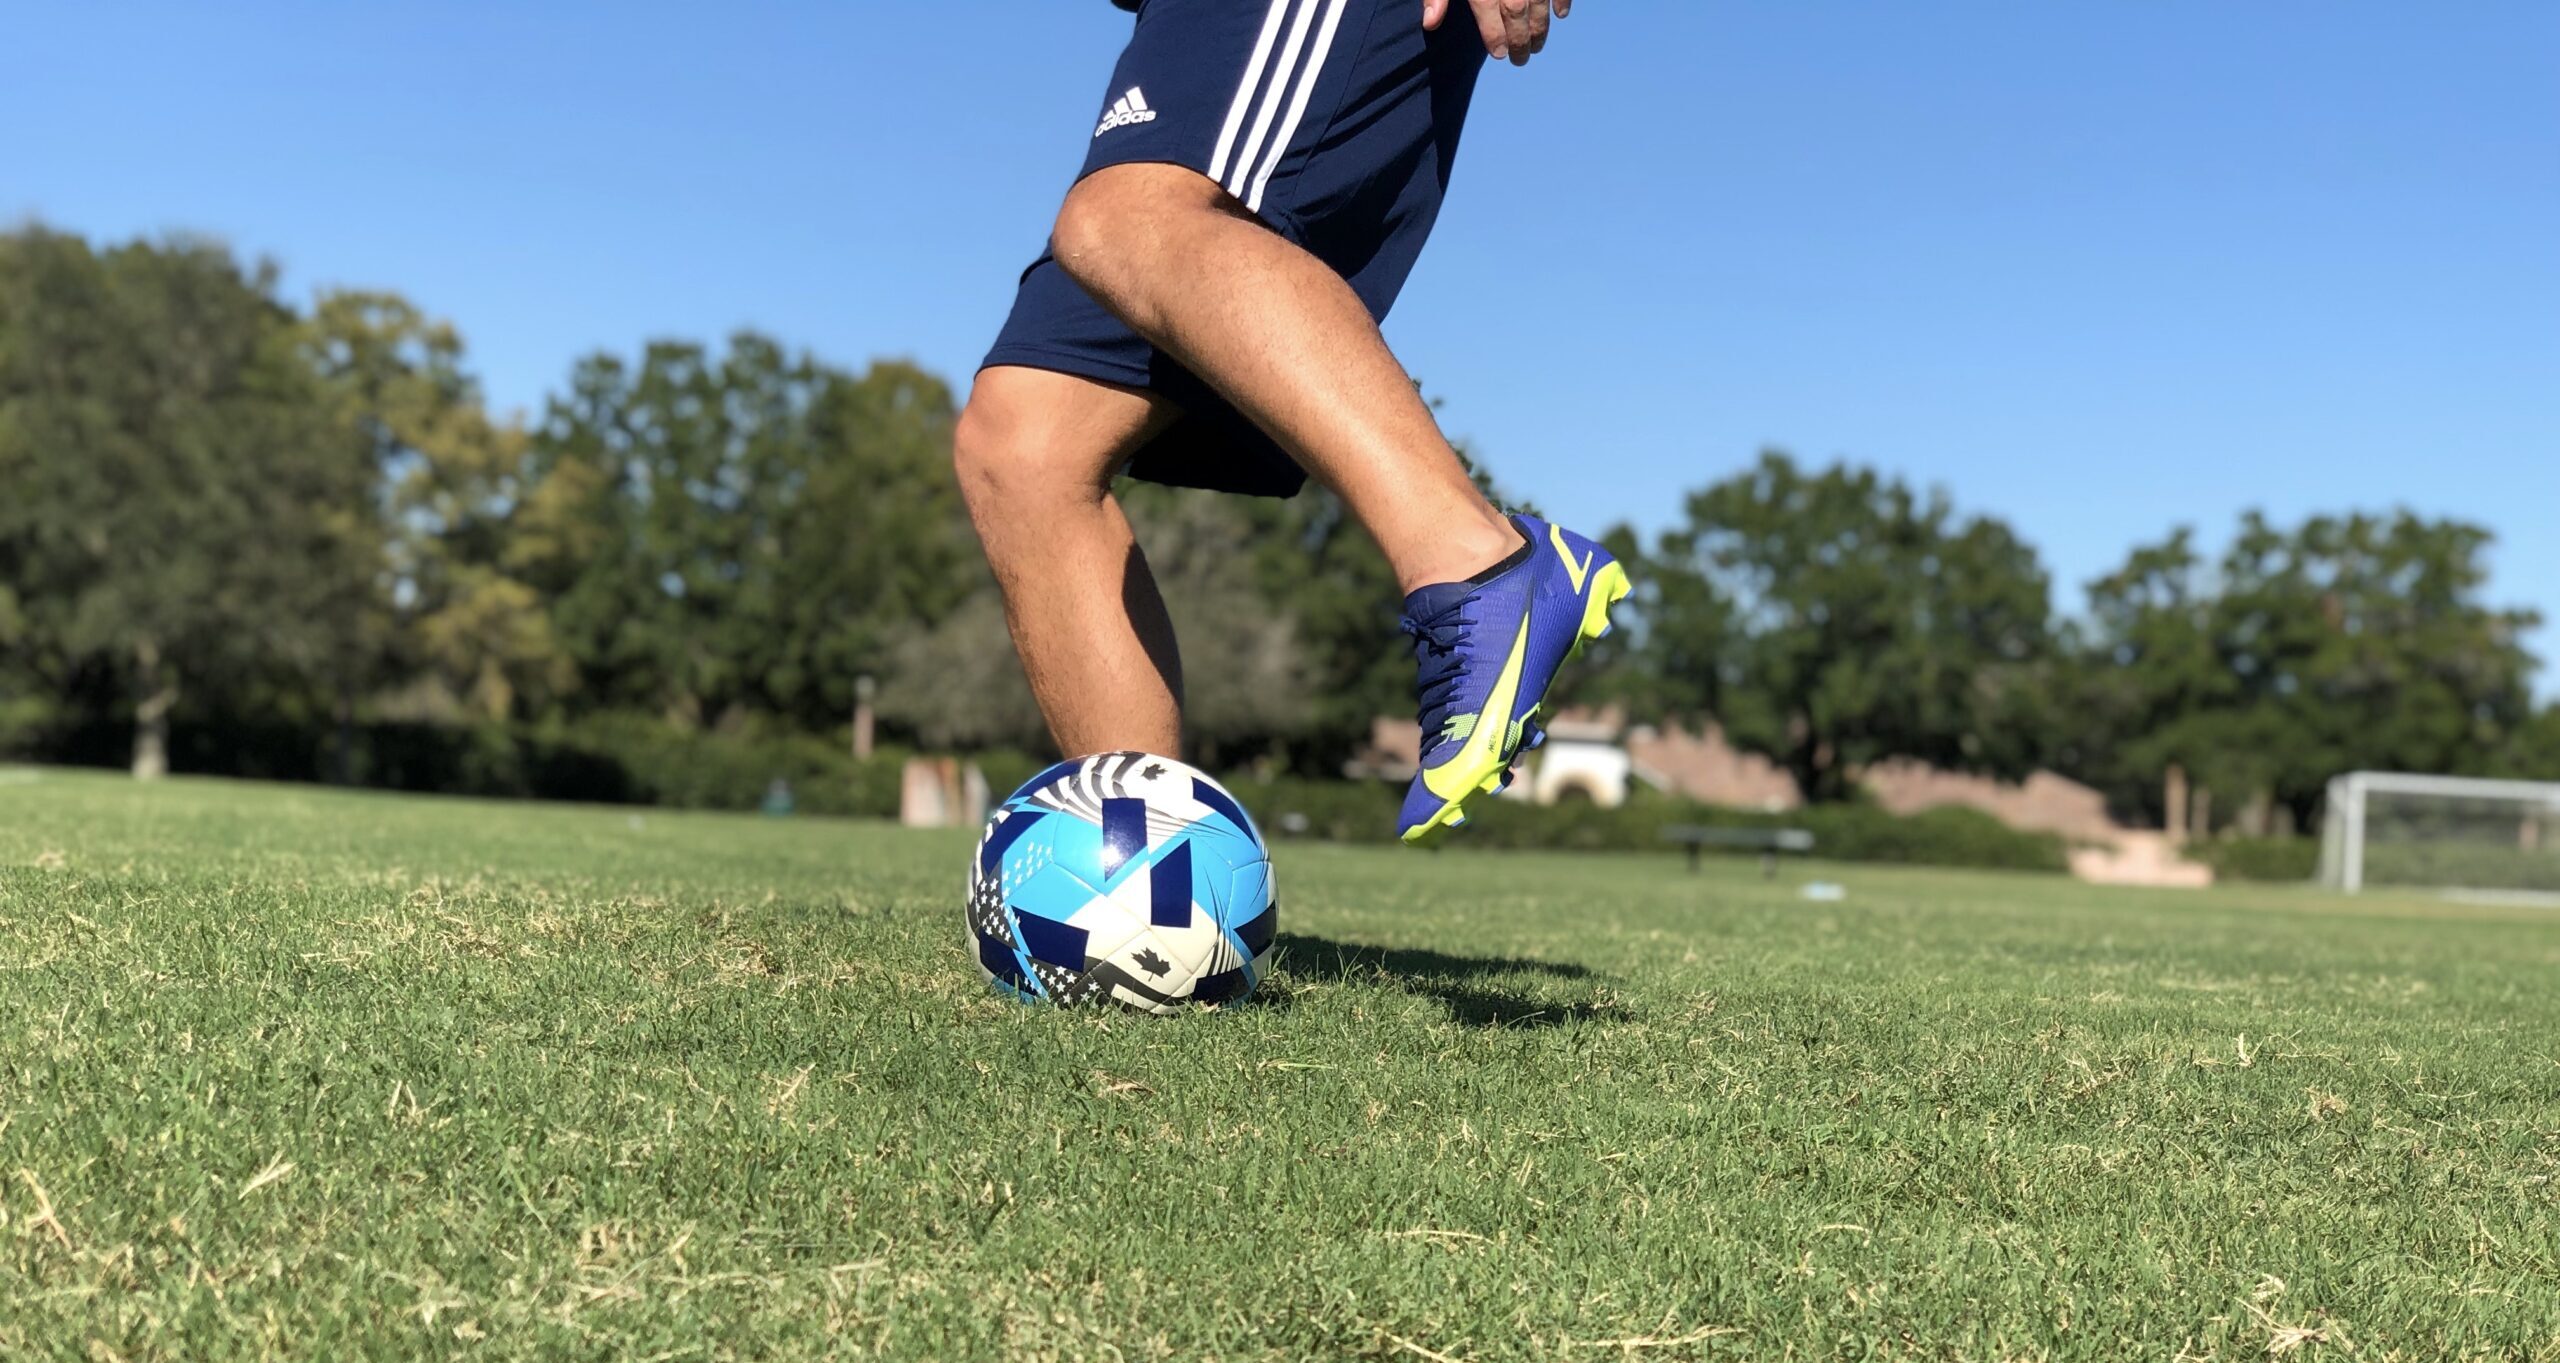 5 Simple soccer dribbling moves to beat defenders